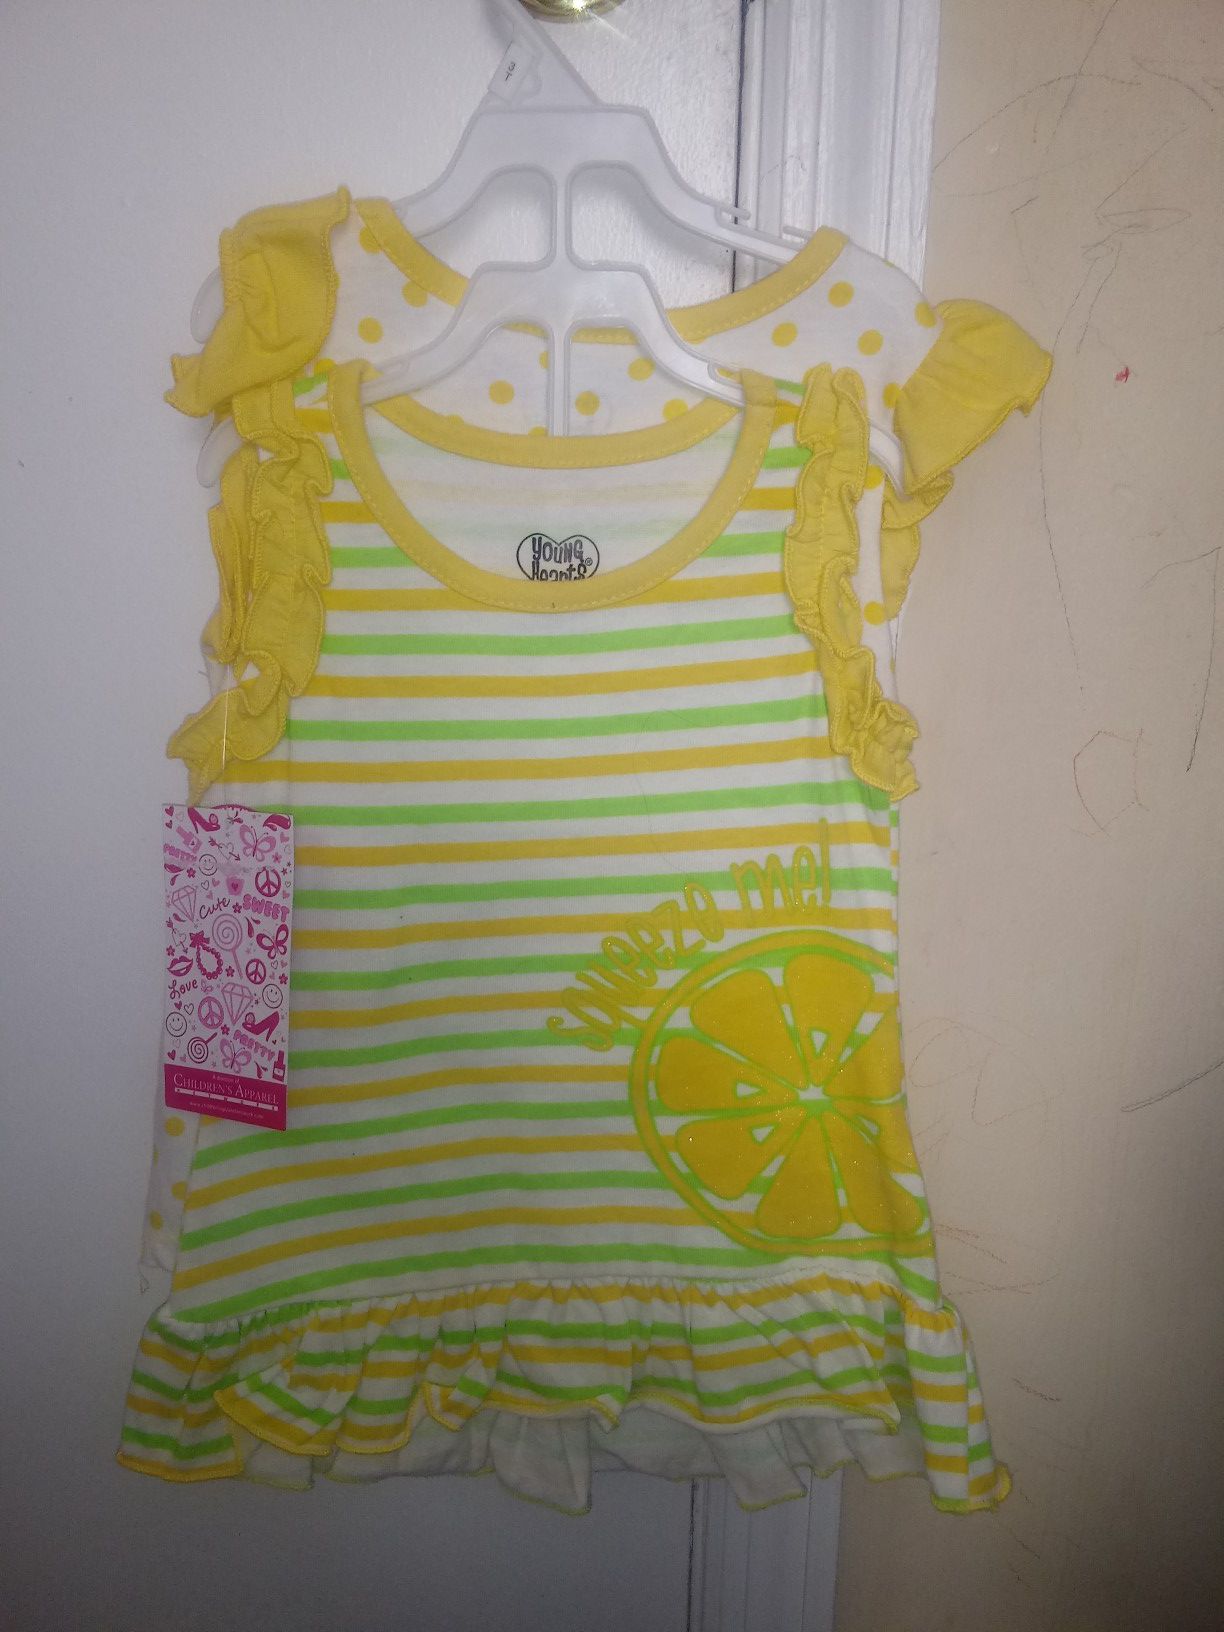 Toddler girl outfit sz 3t